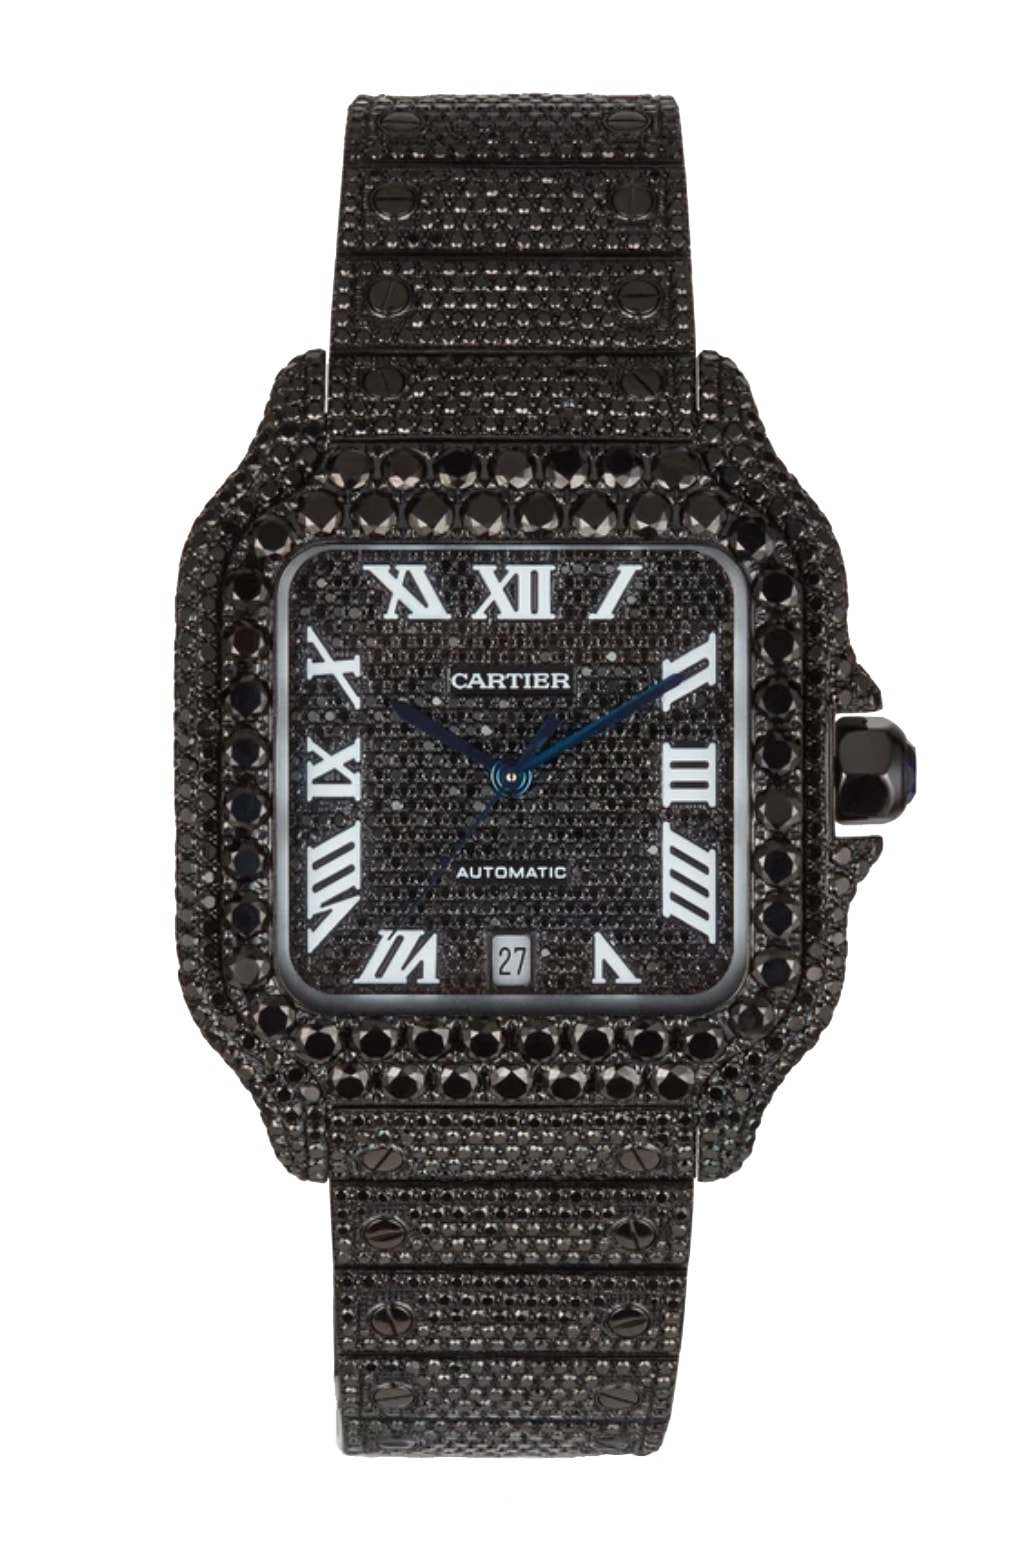 Check Out Private Label's Dazzling Array of Iced Out Watches | Hypebeast